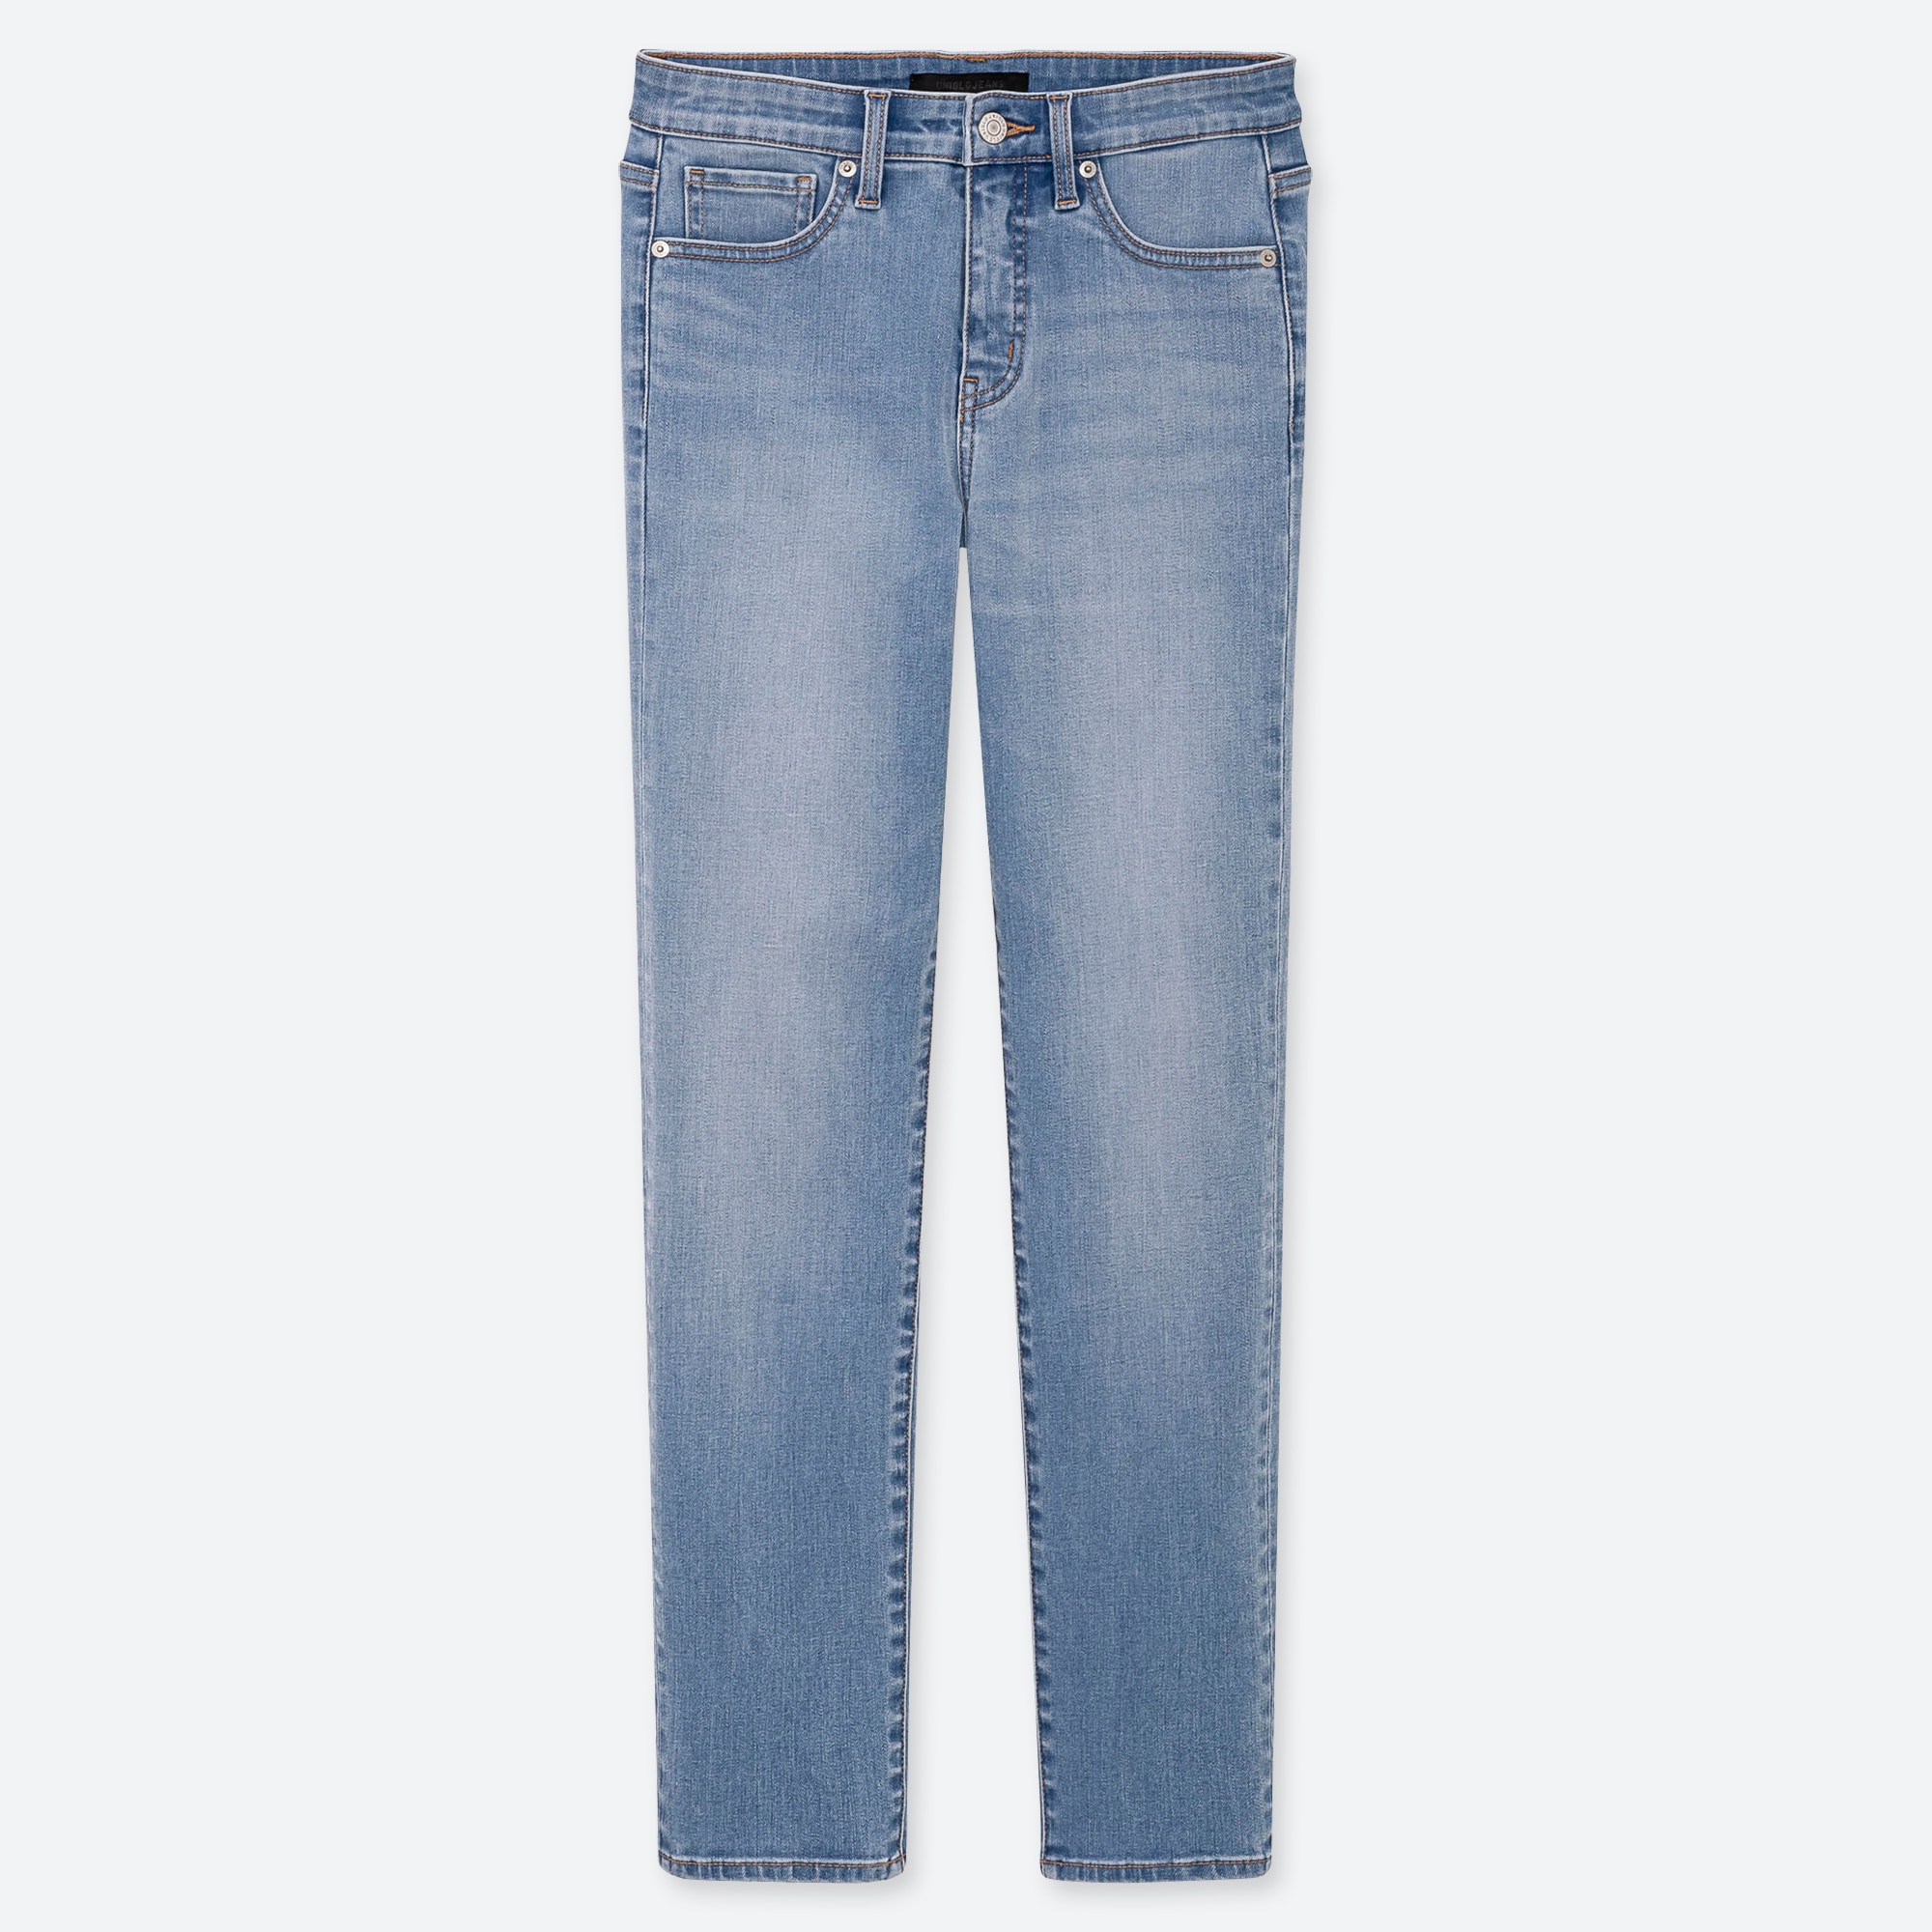 high rise tall skinny jeans